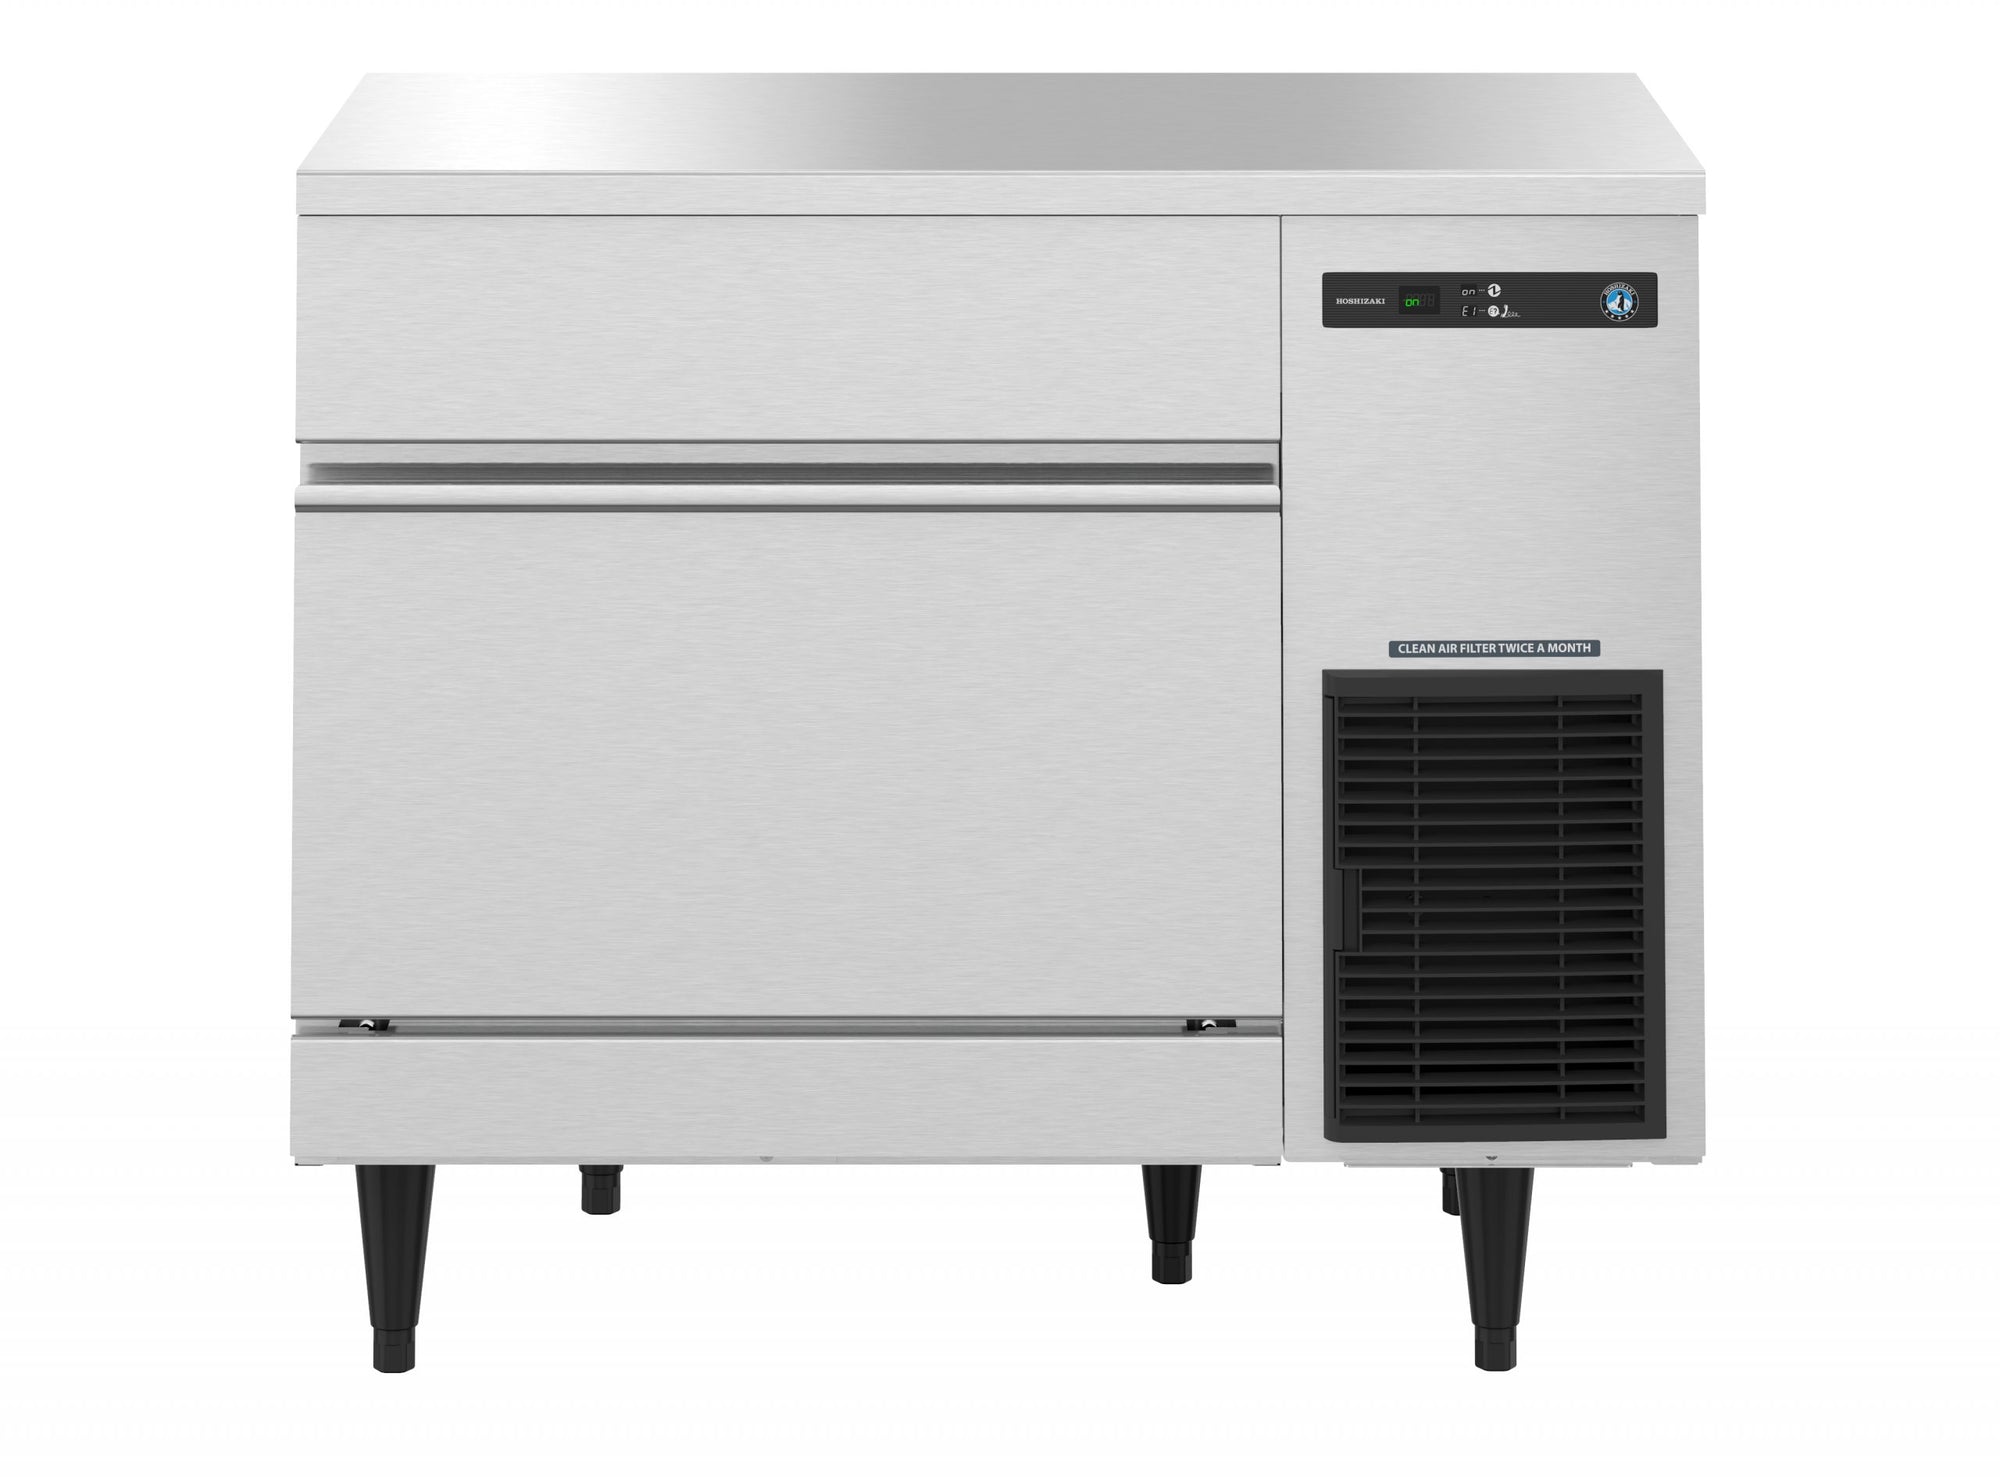 Hoshizaki IM-200BAC | Self-Contained Square Icemaker, Air-cooled, 75 lbs capacity